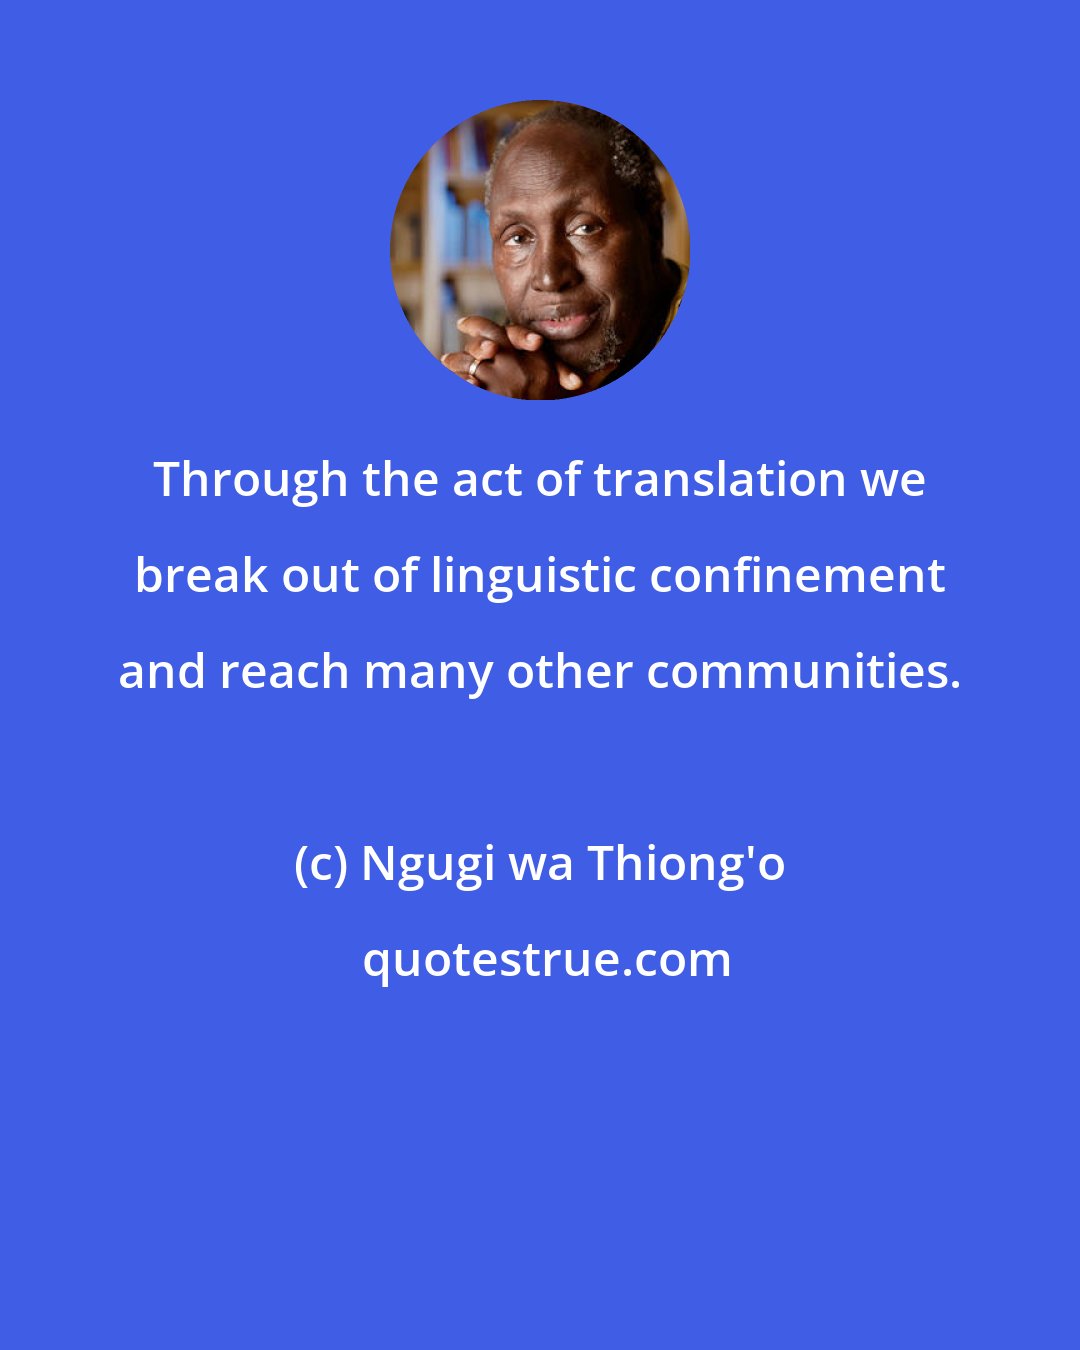 Ngugi wa Thiong'o: Through the act of translation we break out of linguistic confinement and reach many other communities.